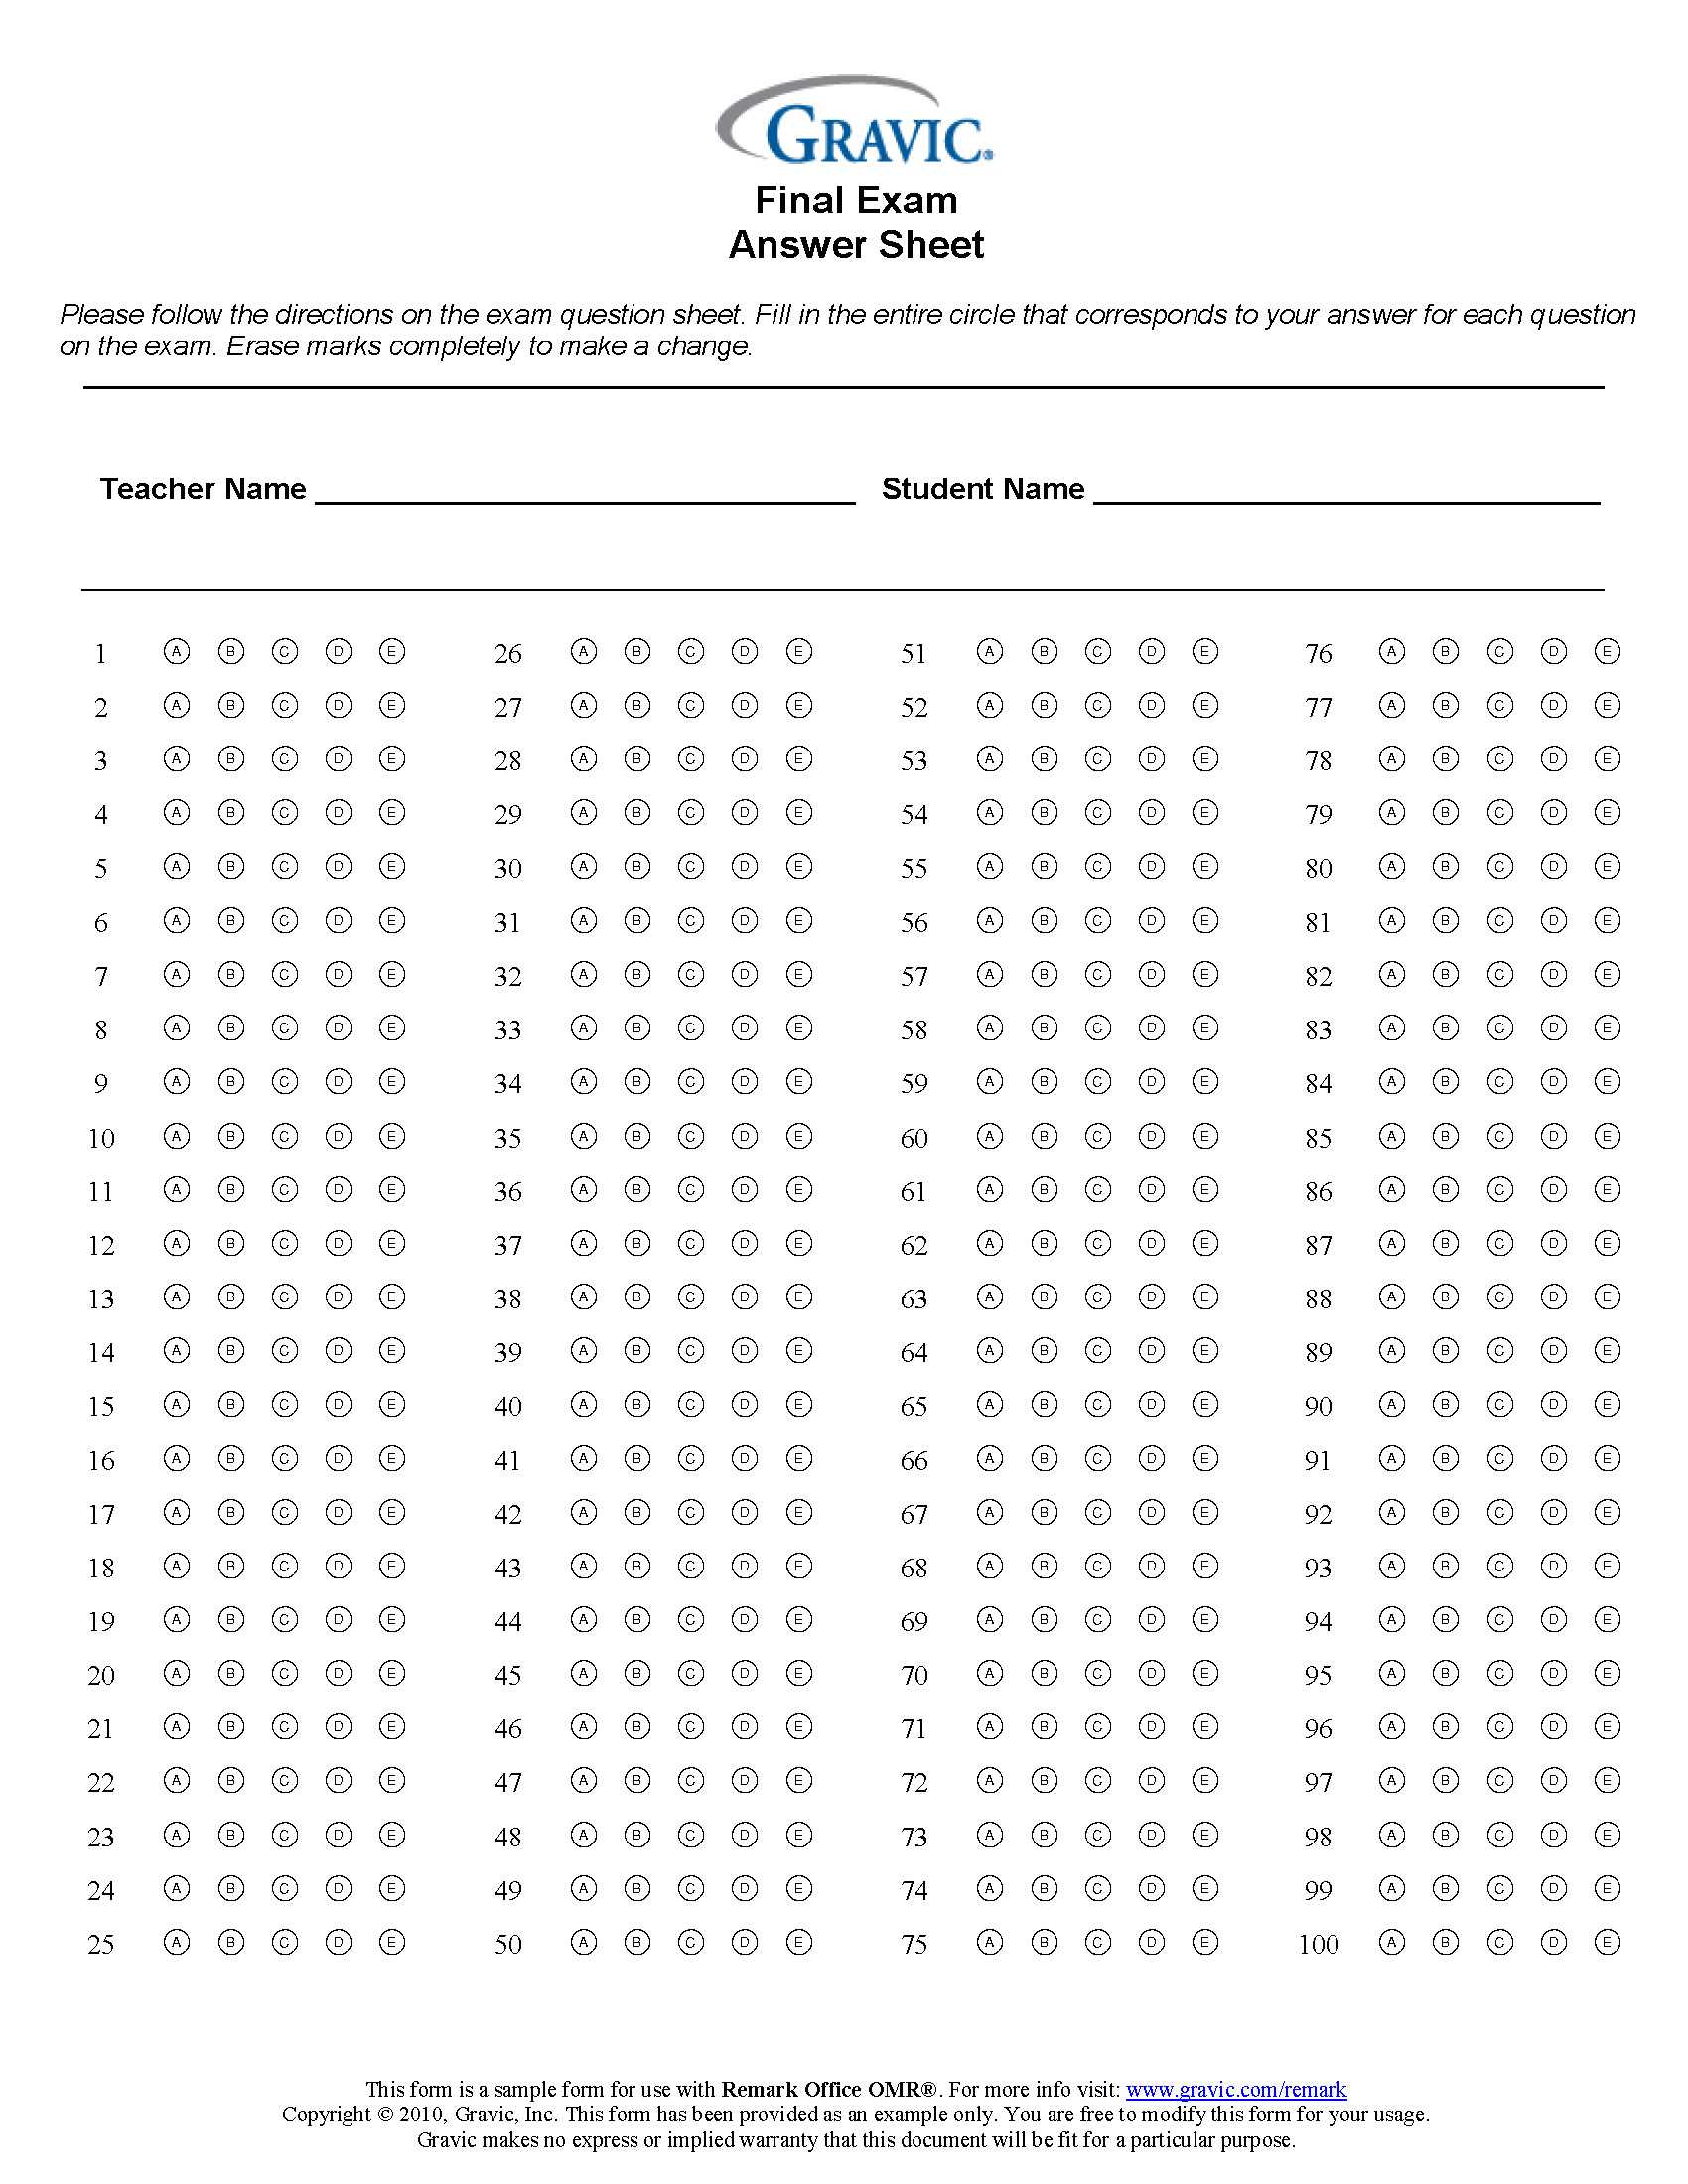 Final Exam 100 Question Test Answer Sheet · Remark Software Within Blank Answer Sheet Template 1 100